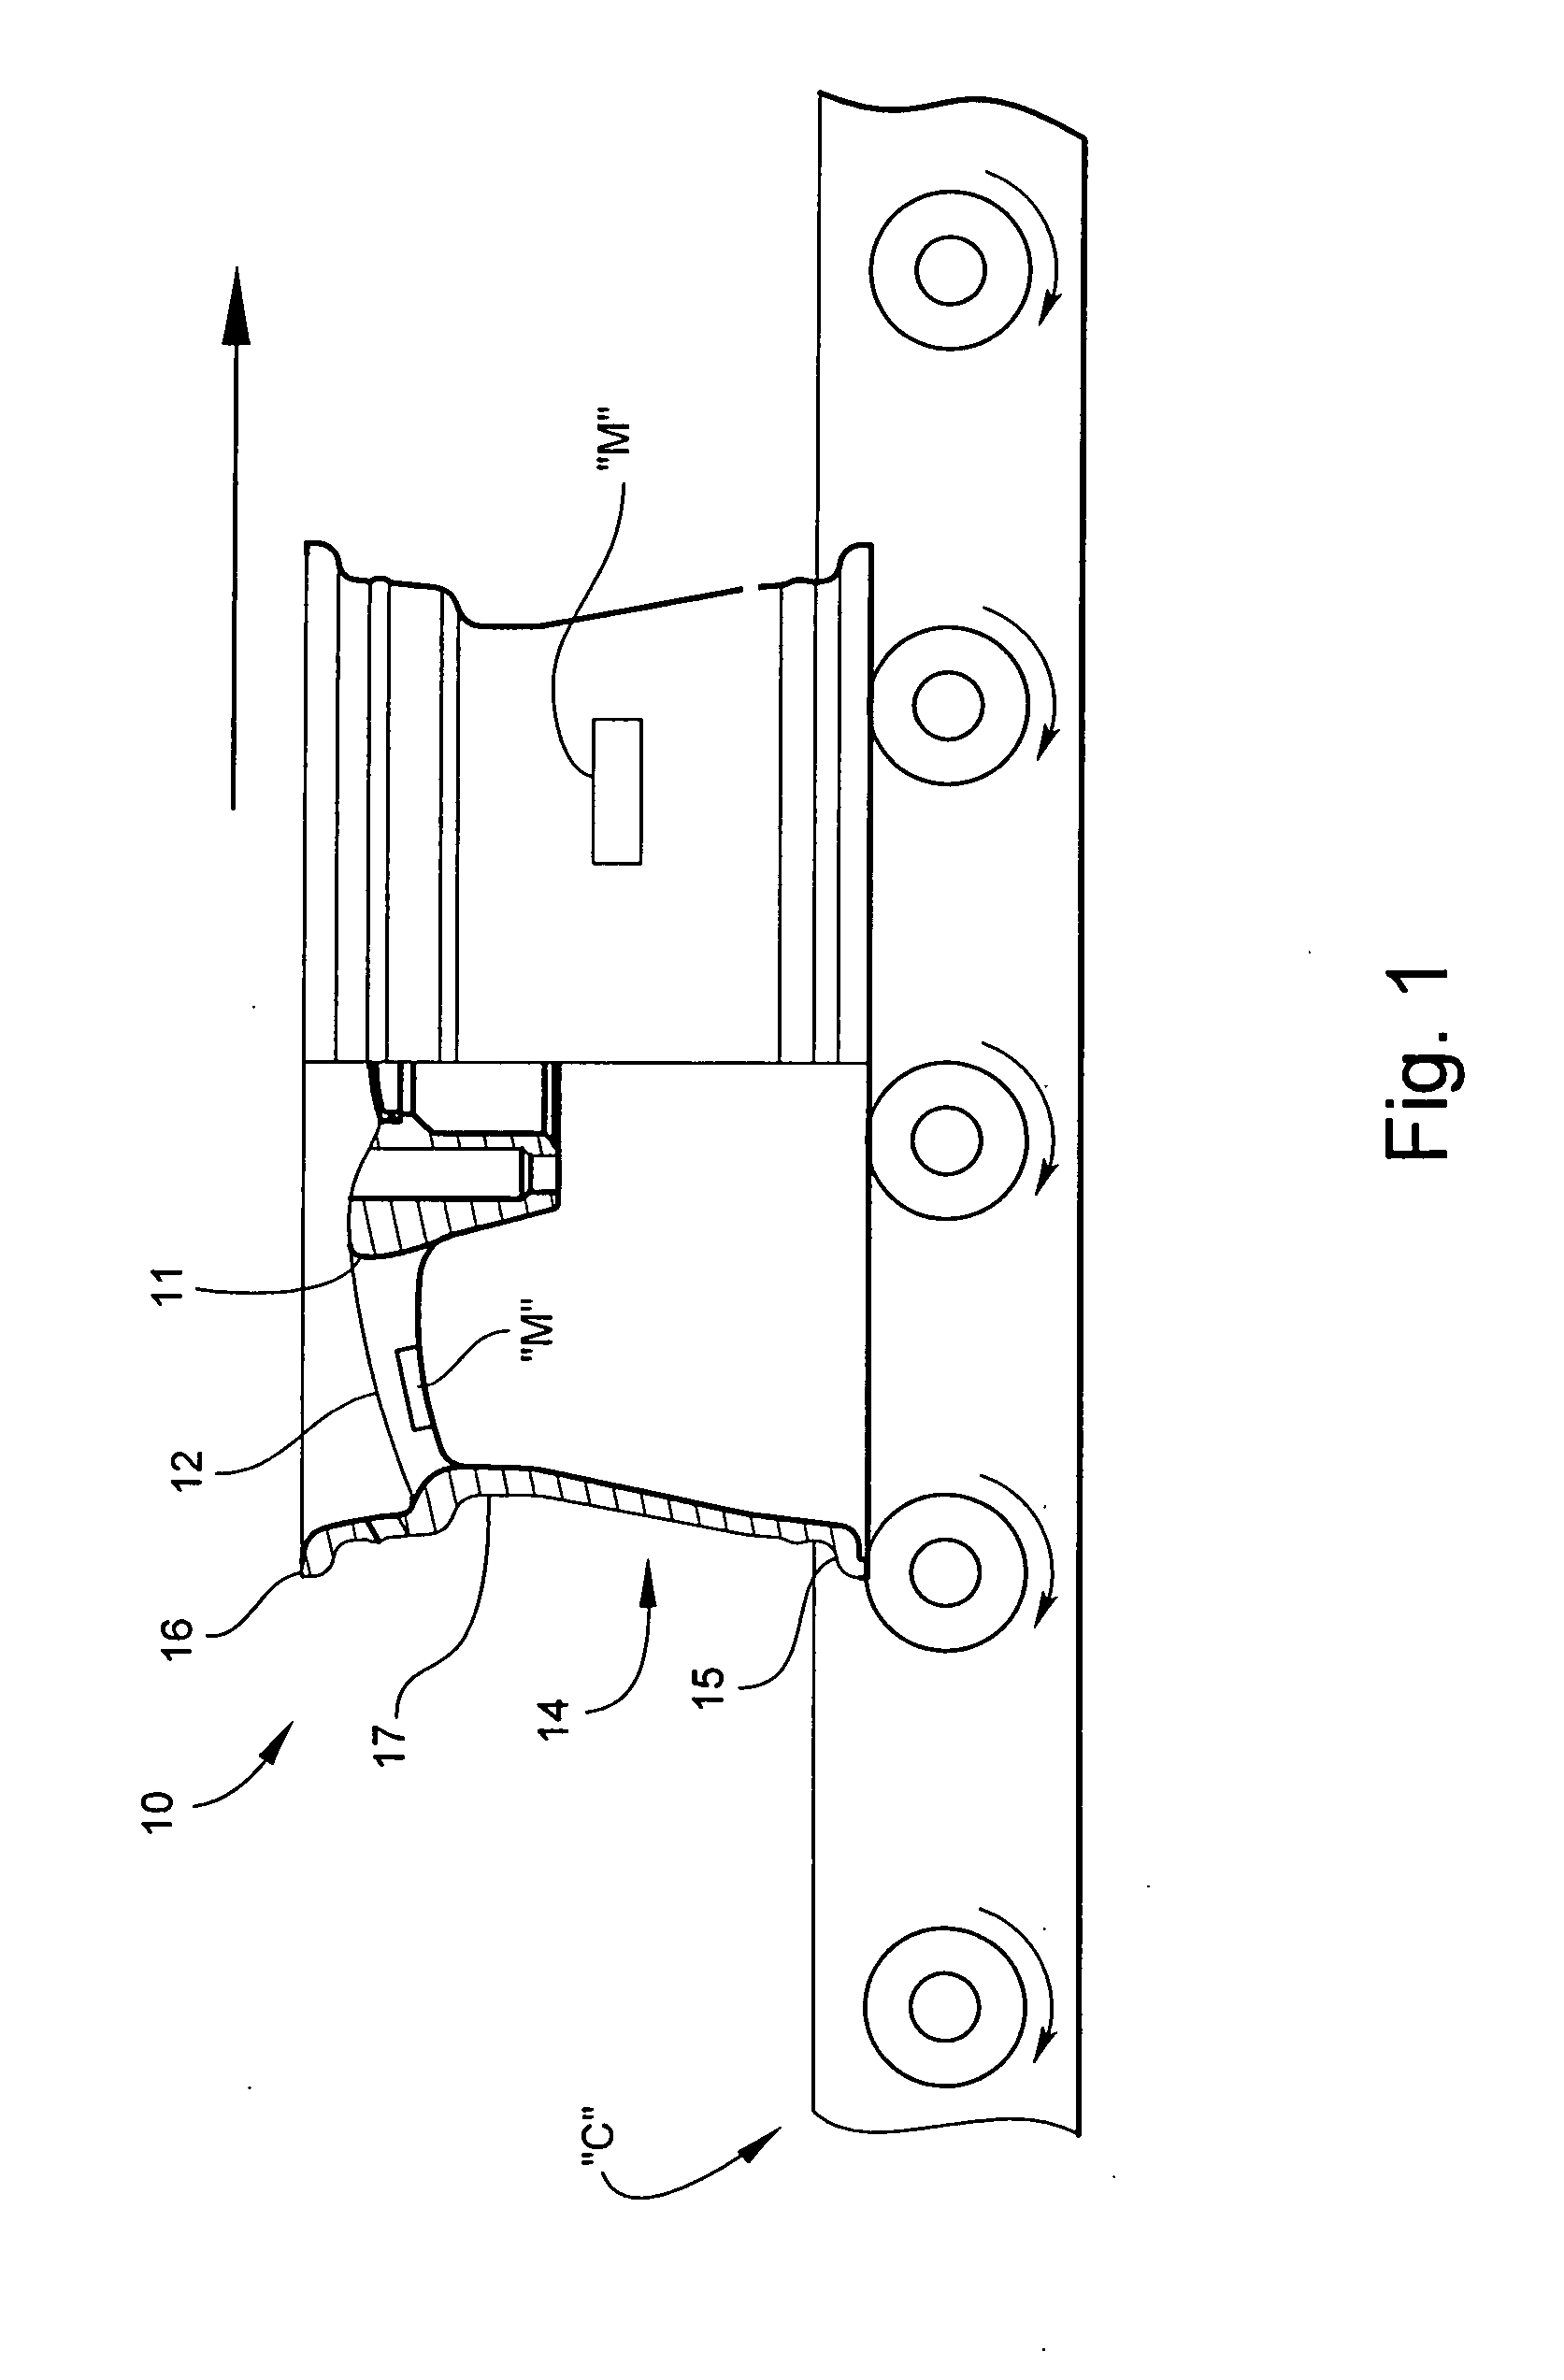 System and method for electronically identifying vehicle wheels on-the-fly during manufacture